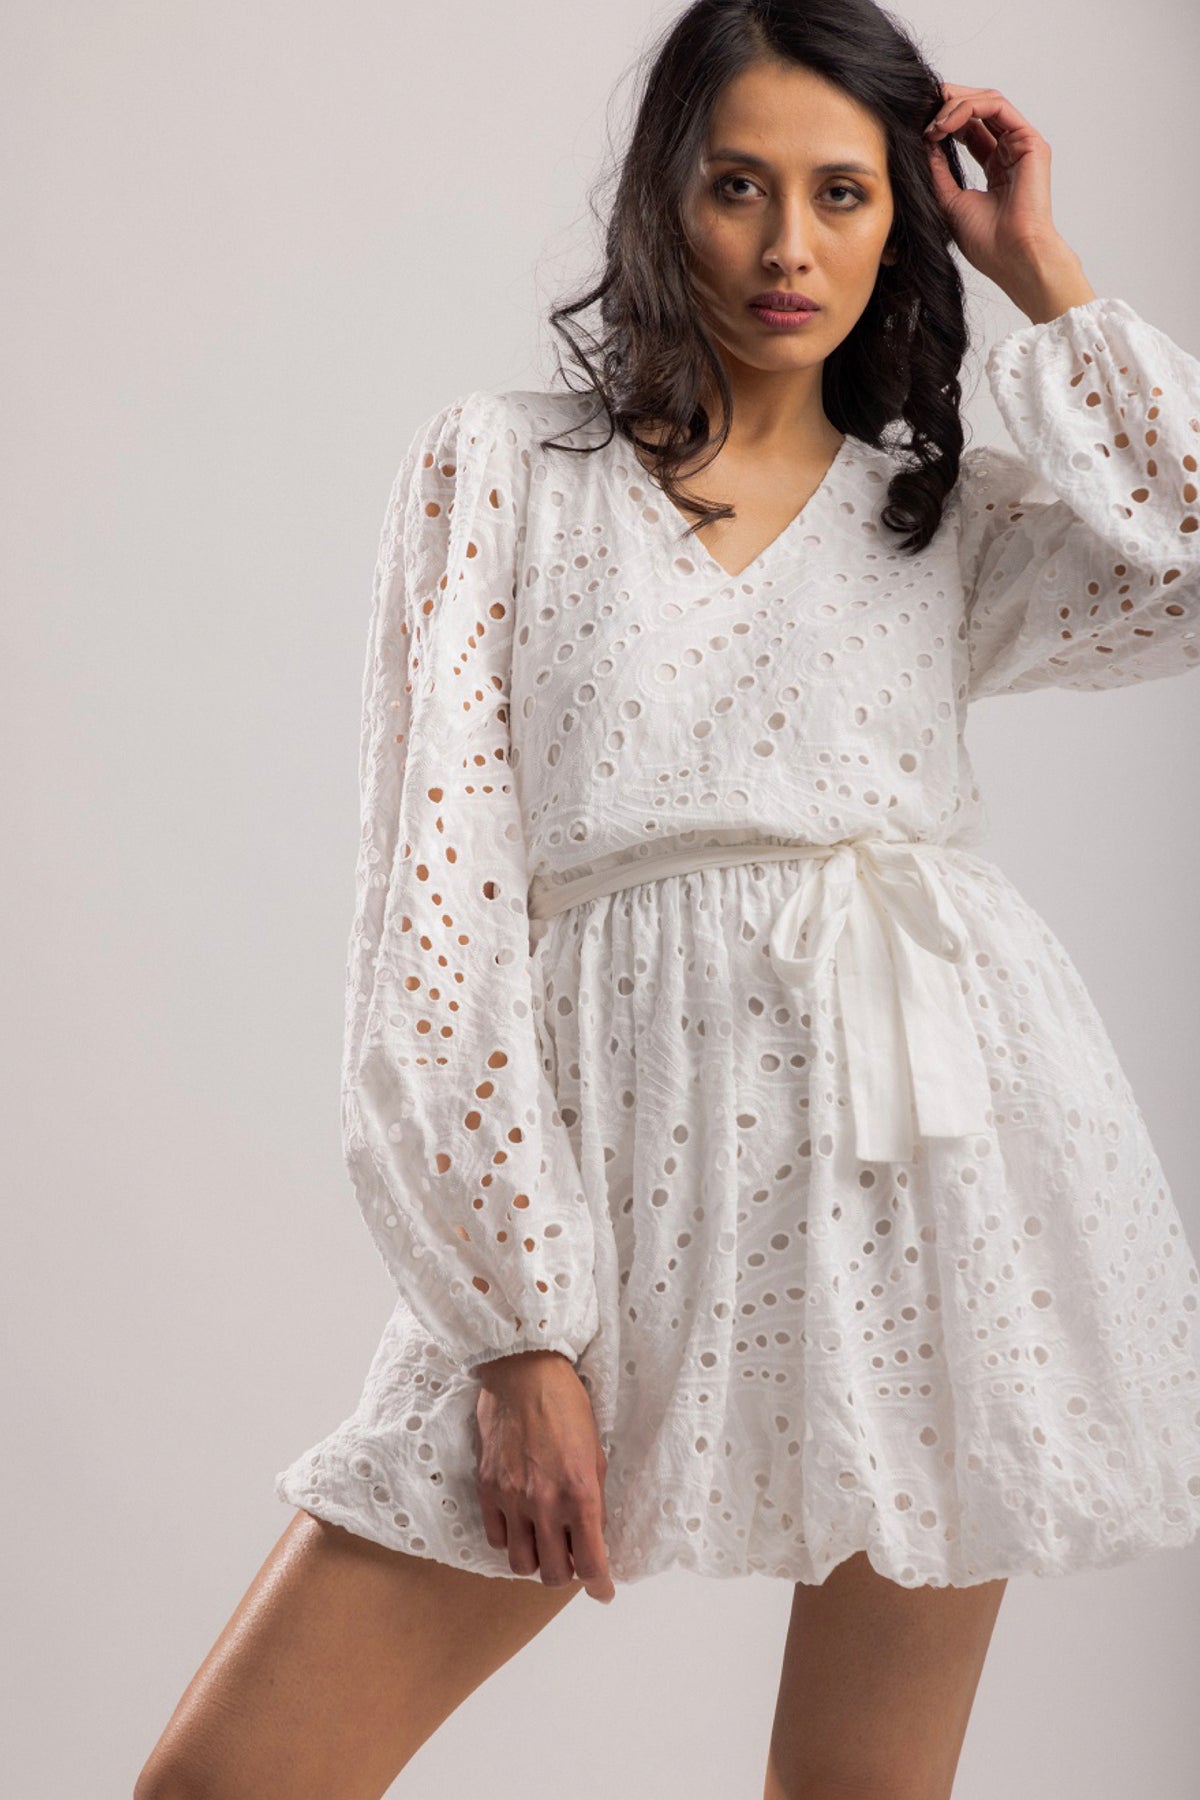 Oyster Dress White Lace